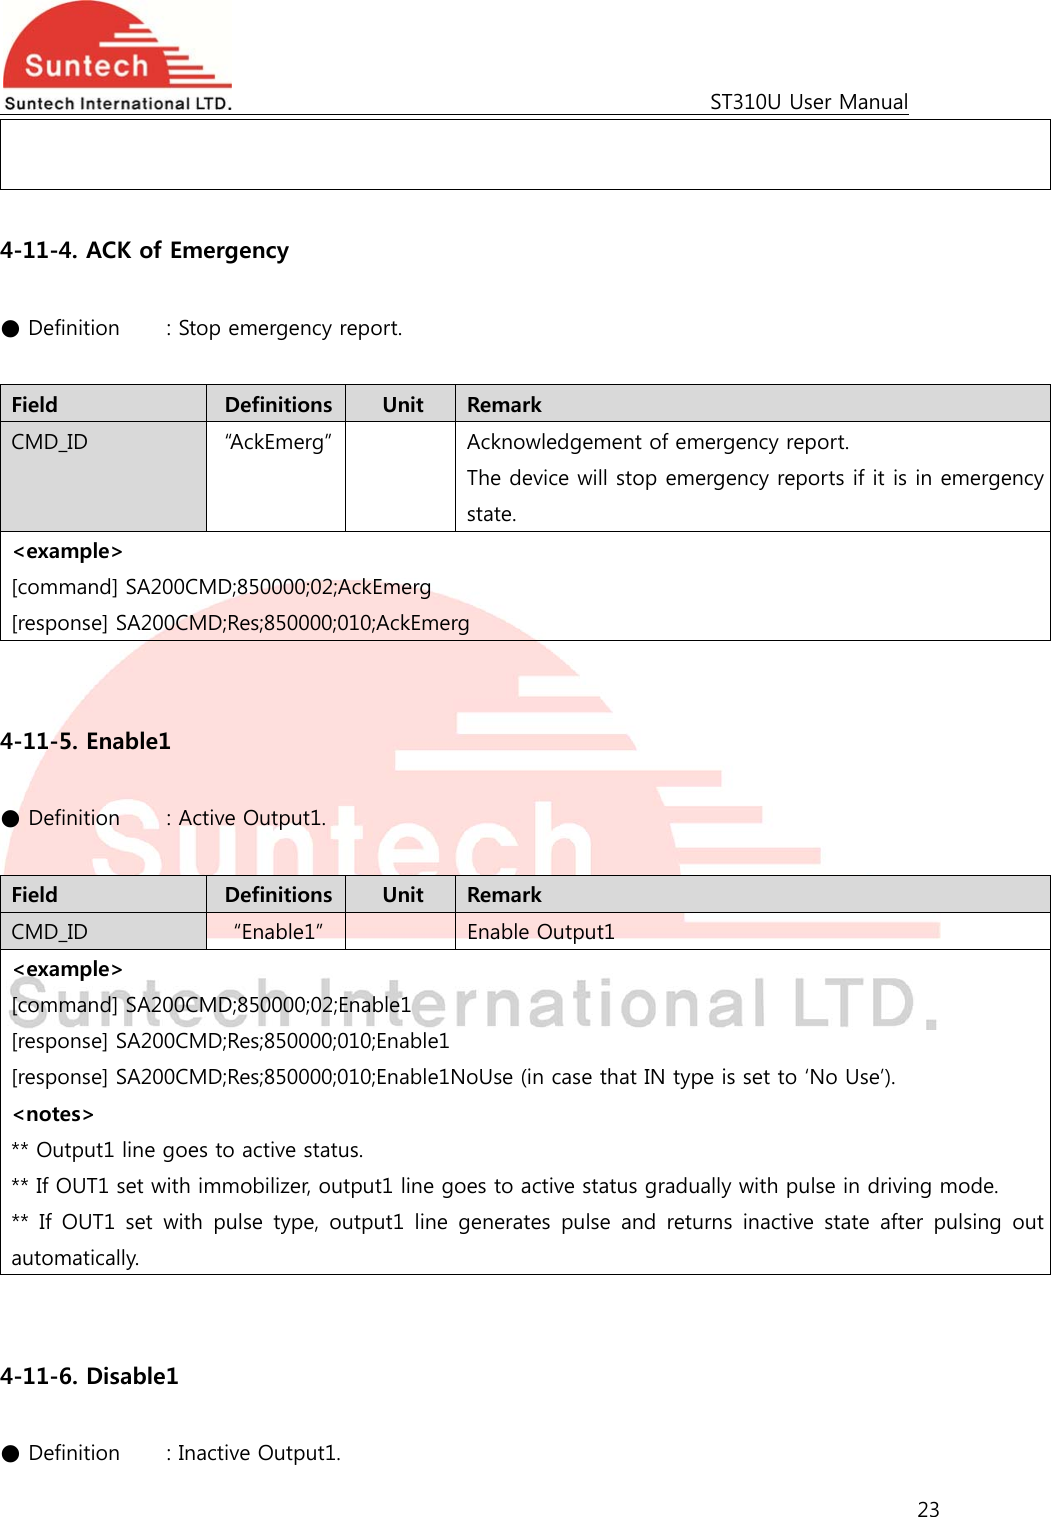                                                                                             ST310U User Manual 23    4-11-4. ACK of Emergency  ● Definition    : Stop emergency report.  Field  Definitions  Unit  Remark CMD_ID  “AckEmerg”    Acknowledgement of emergency report. The device will stop emergency reports if it is in emergency state. &lt;example&gt; [command] SA200CMD;850000;02;AckEmerg [response] SA200CMD;Res;850000;010;AckEmerg   4-11-5. Enable1  ● Definition   : Active Output1.  Field  Definitions  Unit  Remark CMD_ID  “Enable1”    Enable Output1 &lt;example&gt; [command] SA200CMD;850000;02;Enable1 [response] SA200CMD;Res;850000;010;Enable1 [response] SA200CMD;Res;850000;010;Enable1NoUse (in case that IN type is set to ‘No Use’). &lt;notes&gt; ** Output1 line goes to active status. ** If OUT1 set with immobilizer, output1 line goes to active status gradually with pulse in driving mode. ** If OUT1 set with pulse type, output1 line generates pulse and returns inactive state after pulsing out automatically.   4-11-6. Disable1  ● Definition   : Inactive Output1. 